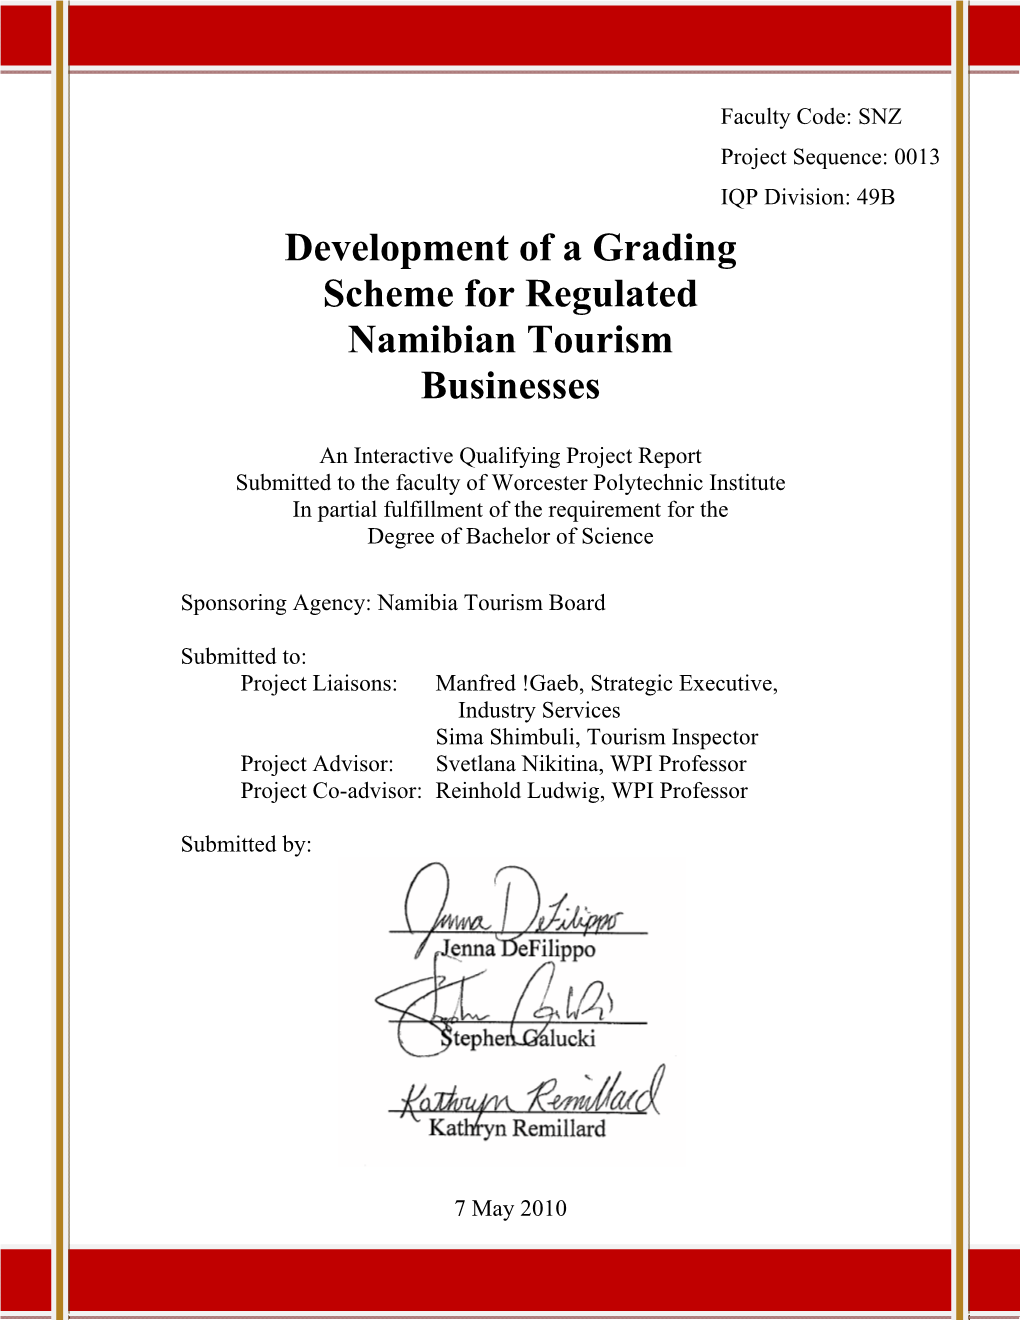 Development of a Grading Scheme for Regulated Namibian Tourism Businesses